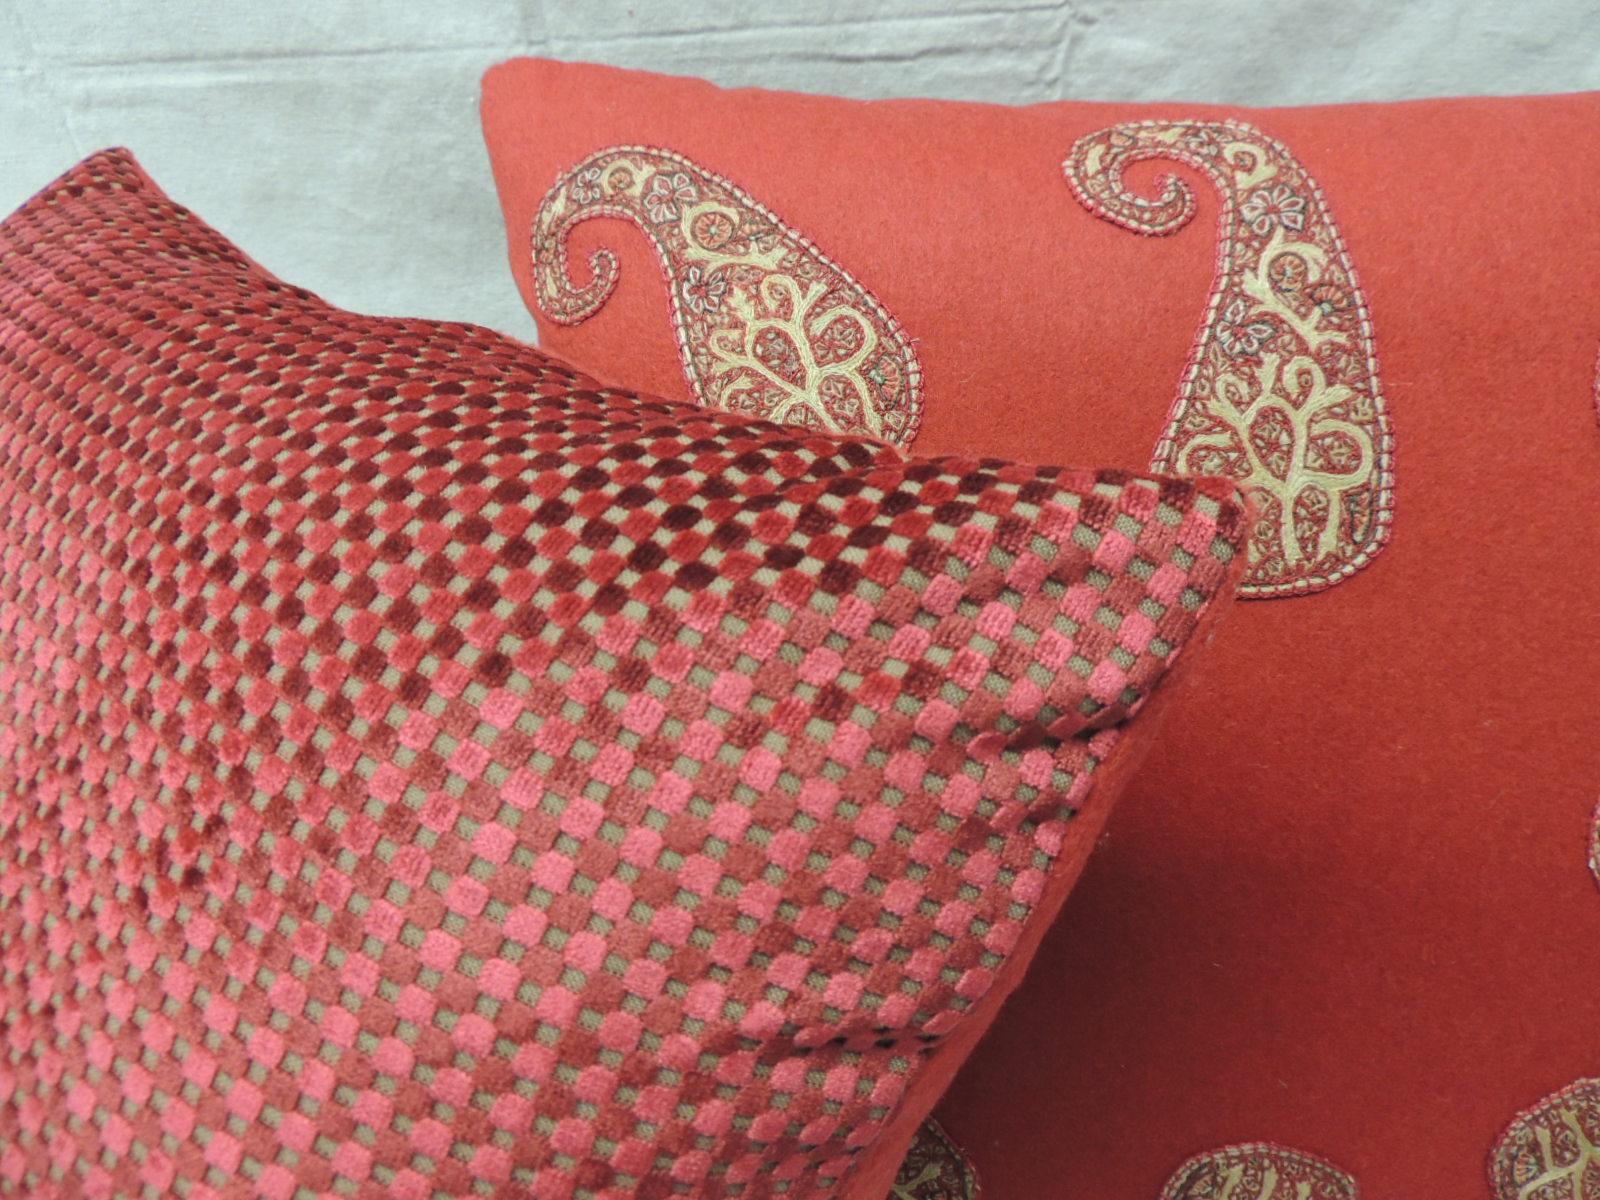 Red Persian Paisley Hand-Applique Embroidered Paisleys Decorative Pillows In Good Condition For Sale In Oakland Park, FL